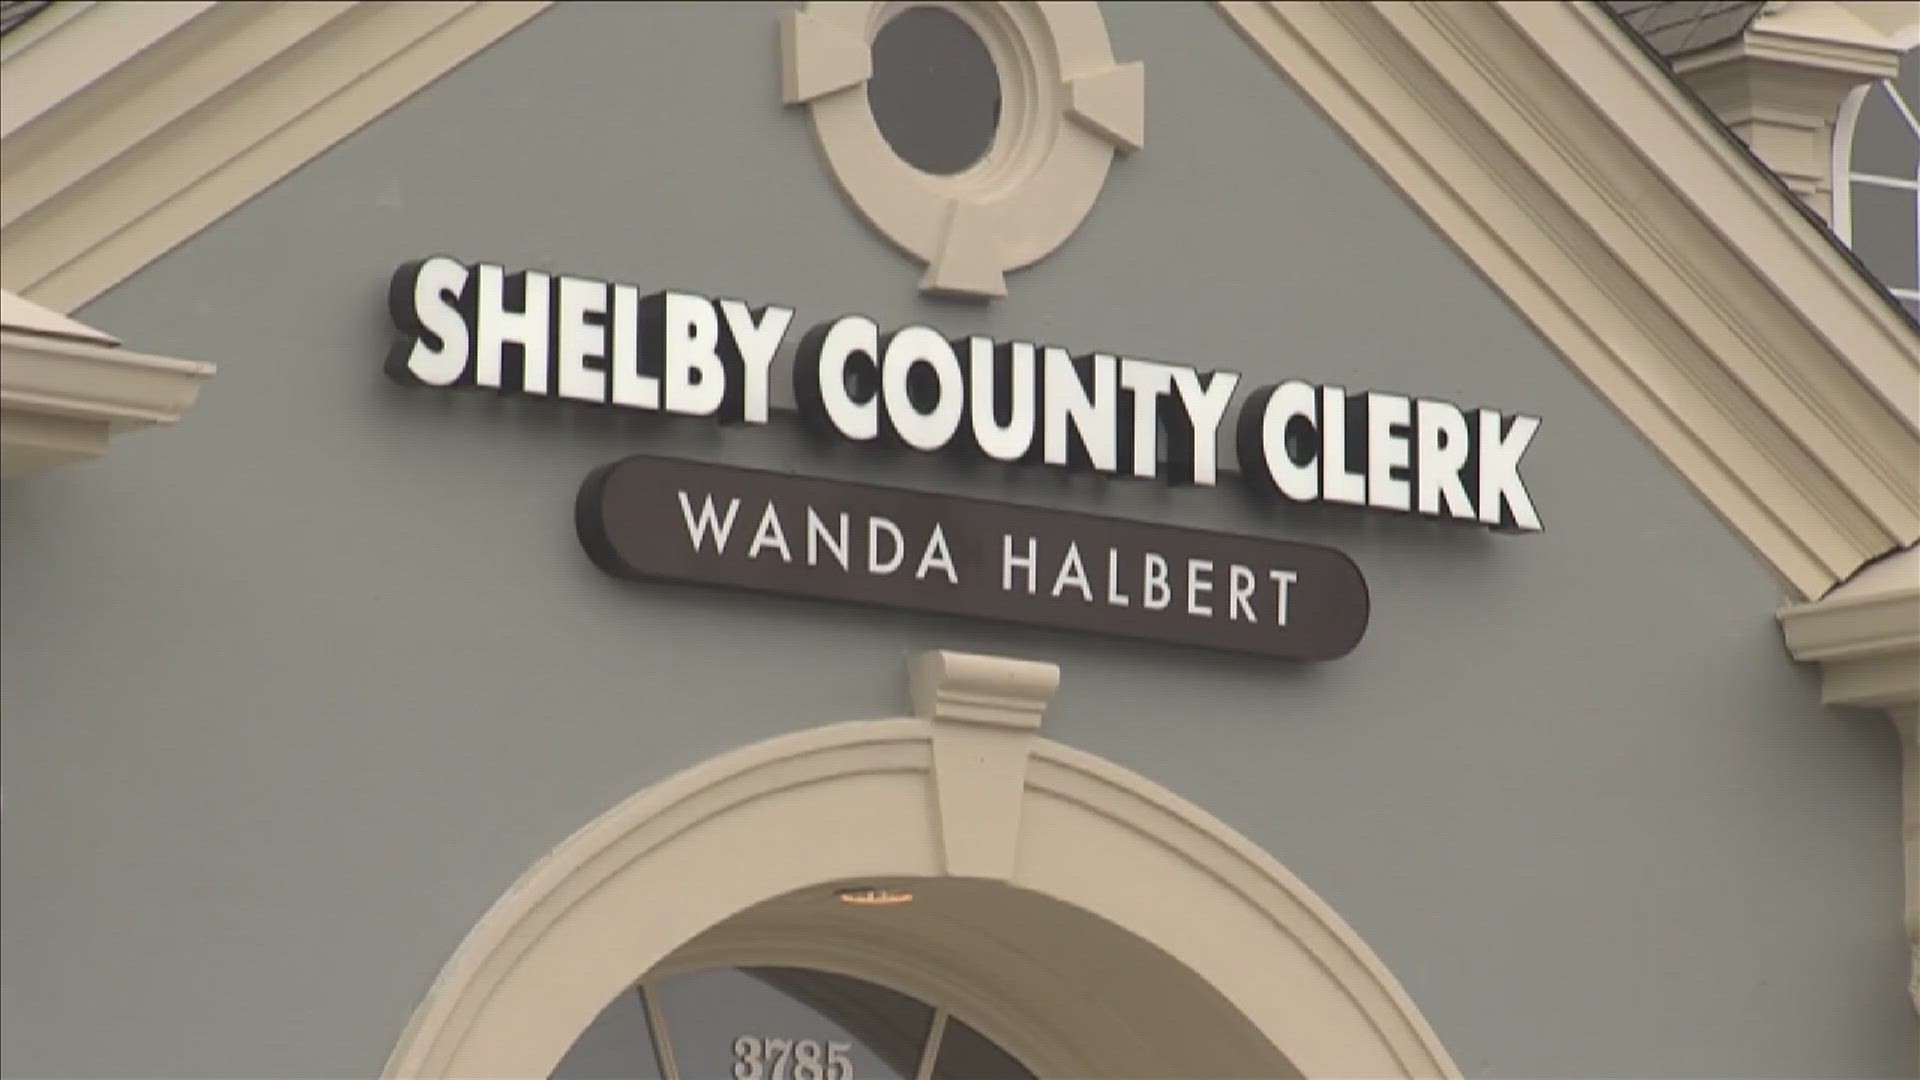 The D.A. has asked an independent investigator to look into complaints about Shelby County Clerk Wanda Halbert.